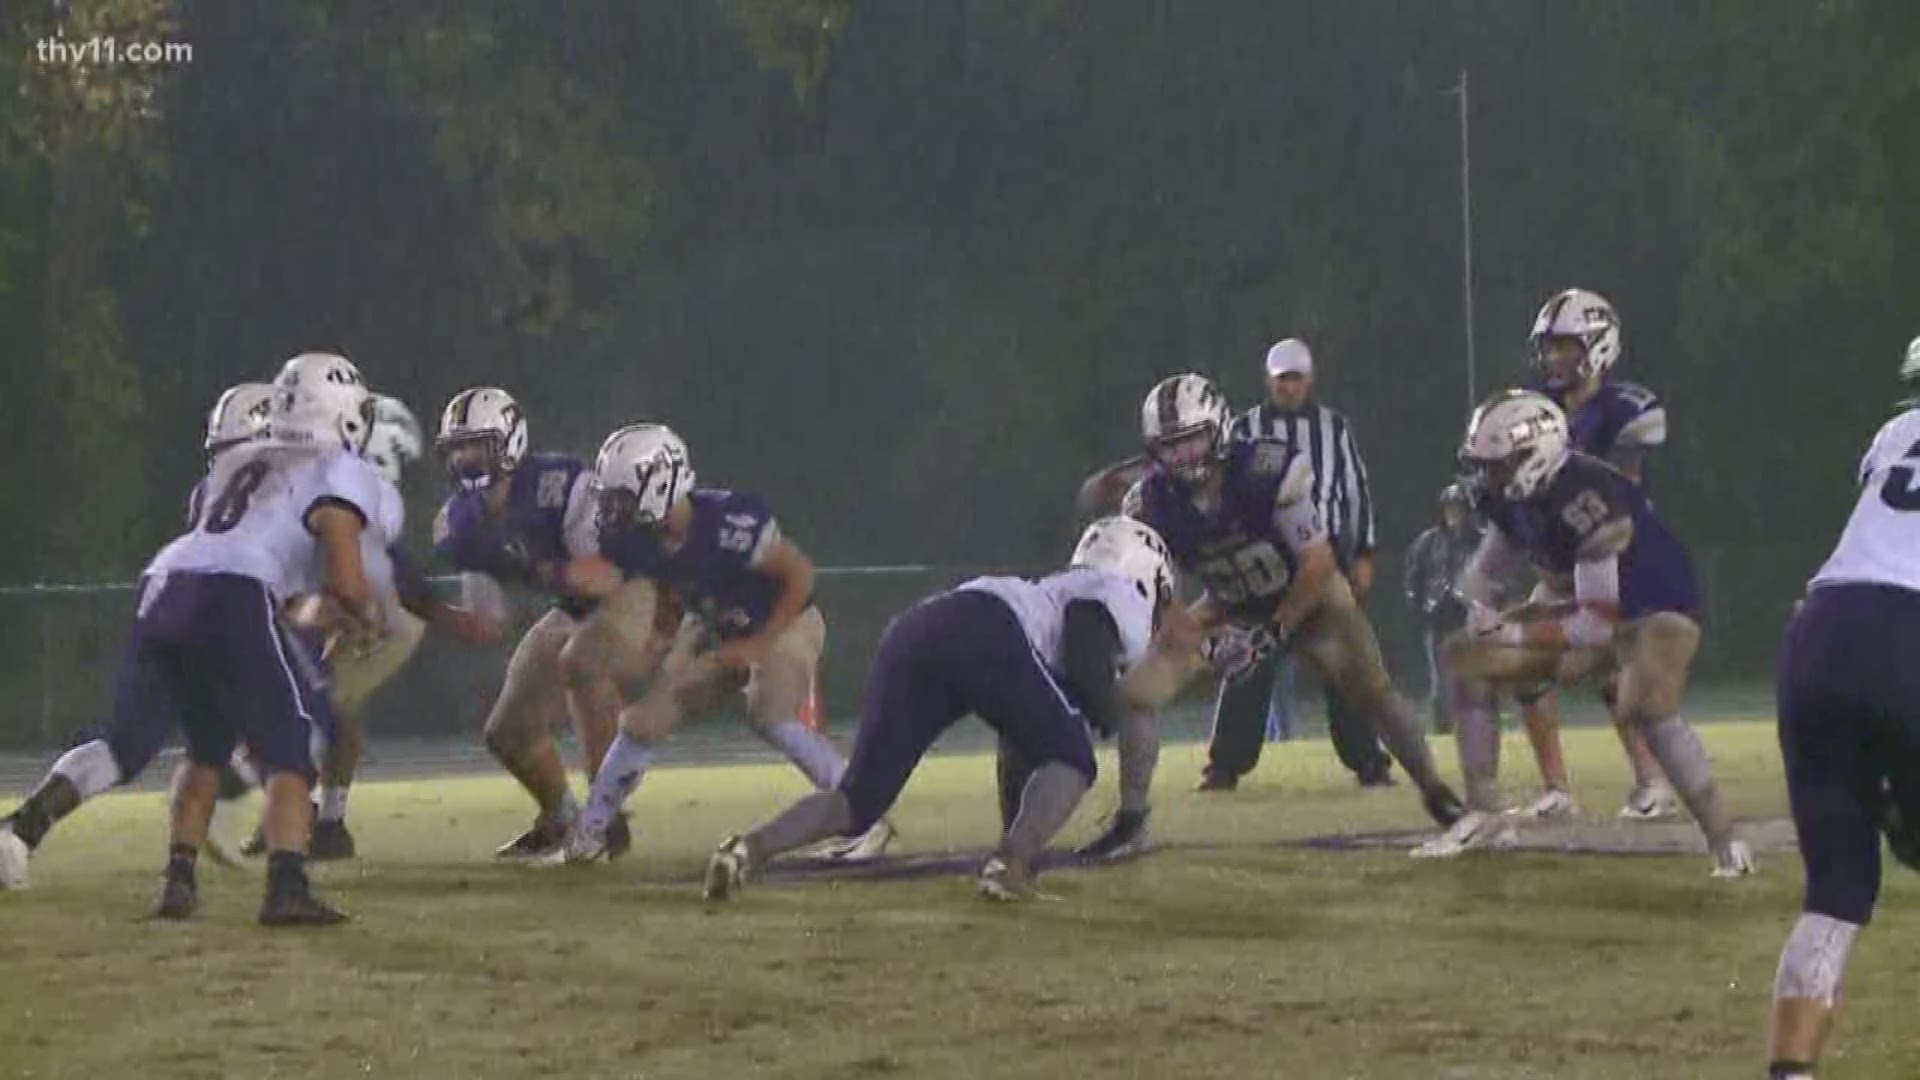 Central Arkansas Christian wins Yarnell's Sweetest Play of the Week for week 8